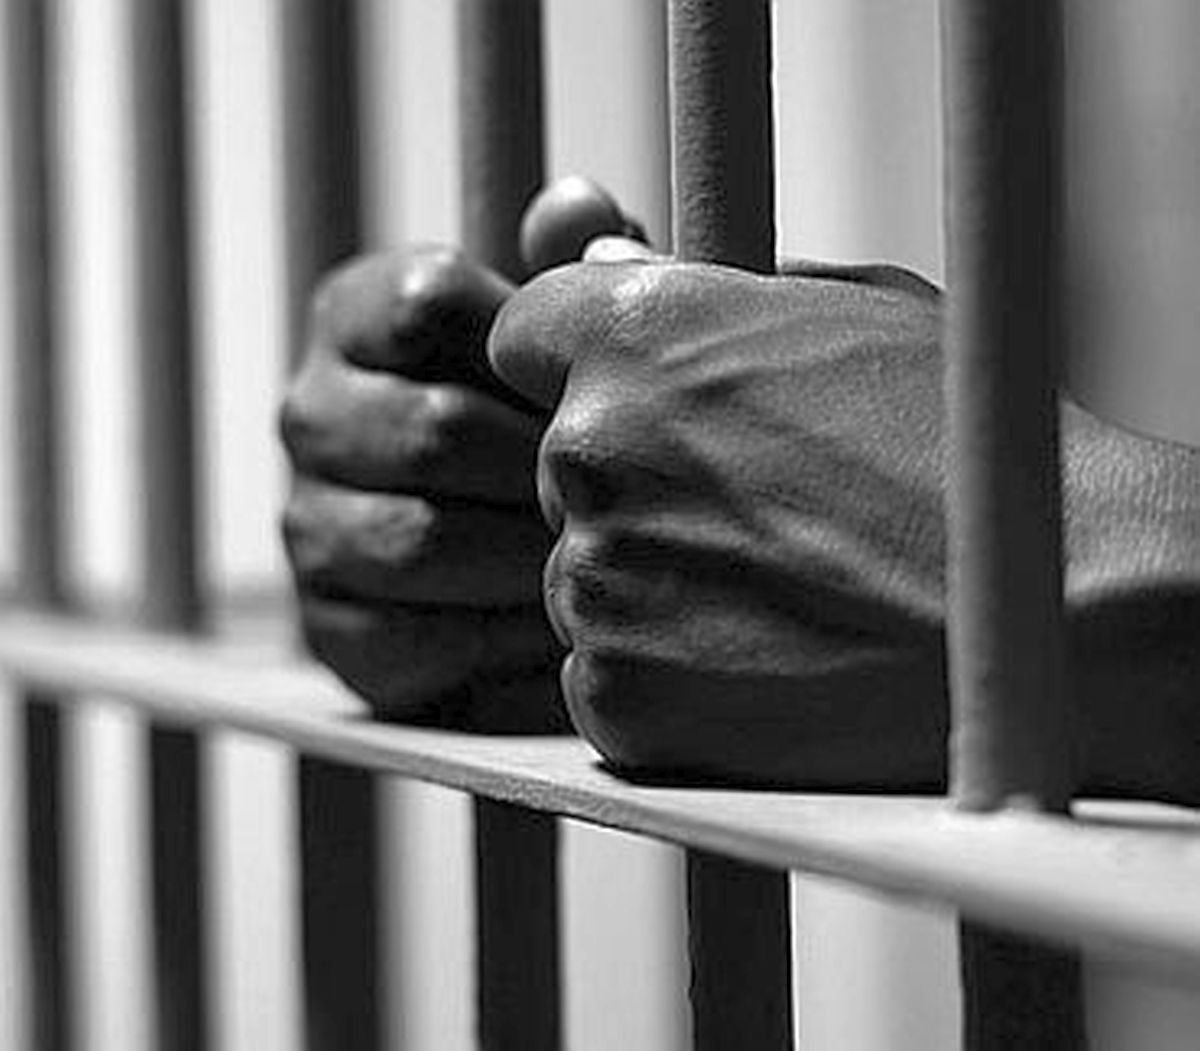 MP: Gangrape, terror convicts to spend life in jail